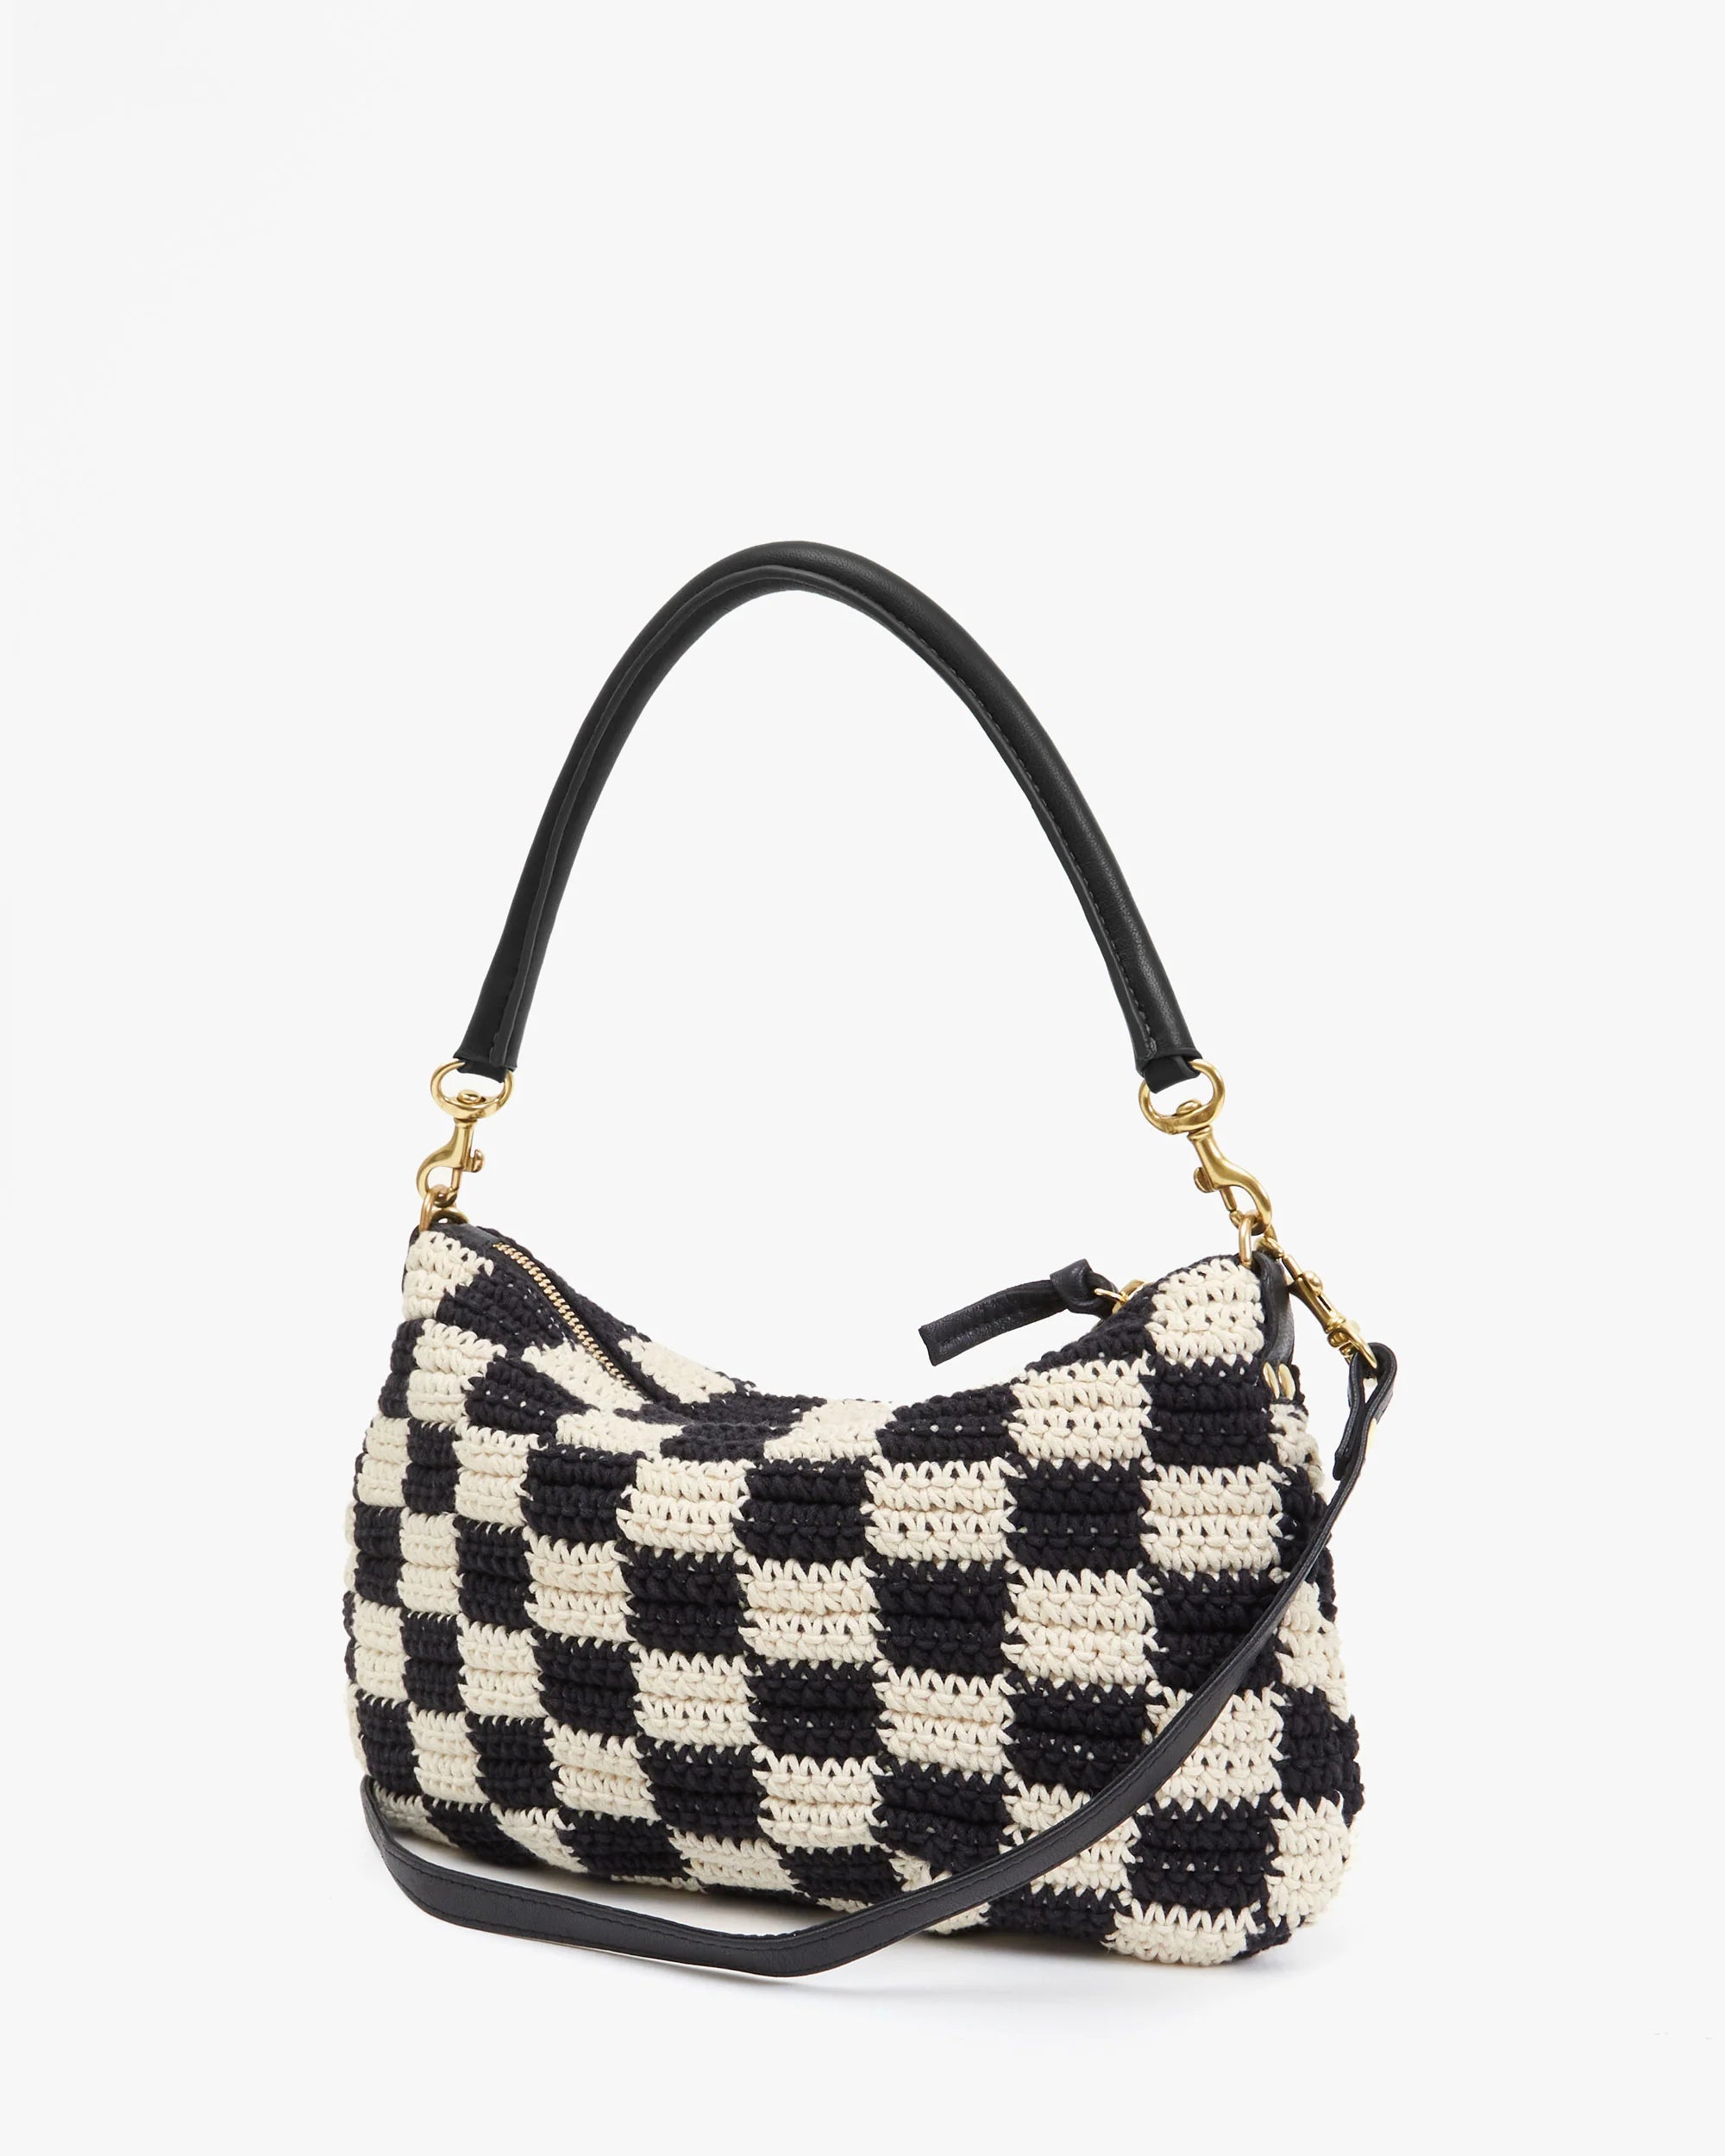 A black and white checkered crochet Petit Moyen Woven Checker shoulder bag from Clare Vivier with a black leather handle and gold hardware. The bag features a zip closure, handwoven leather details, and a detachable crossbody strap. The design creates a stylish, modern look.